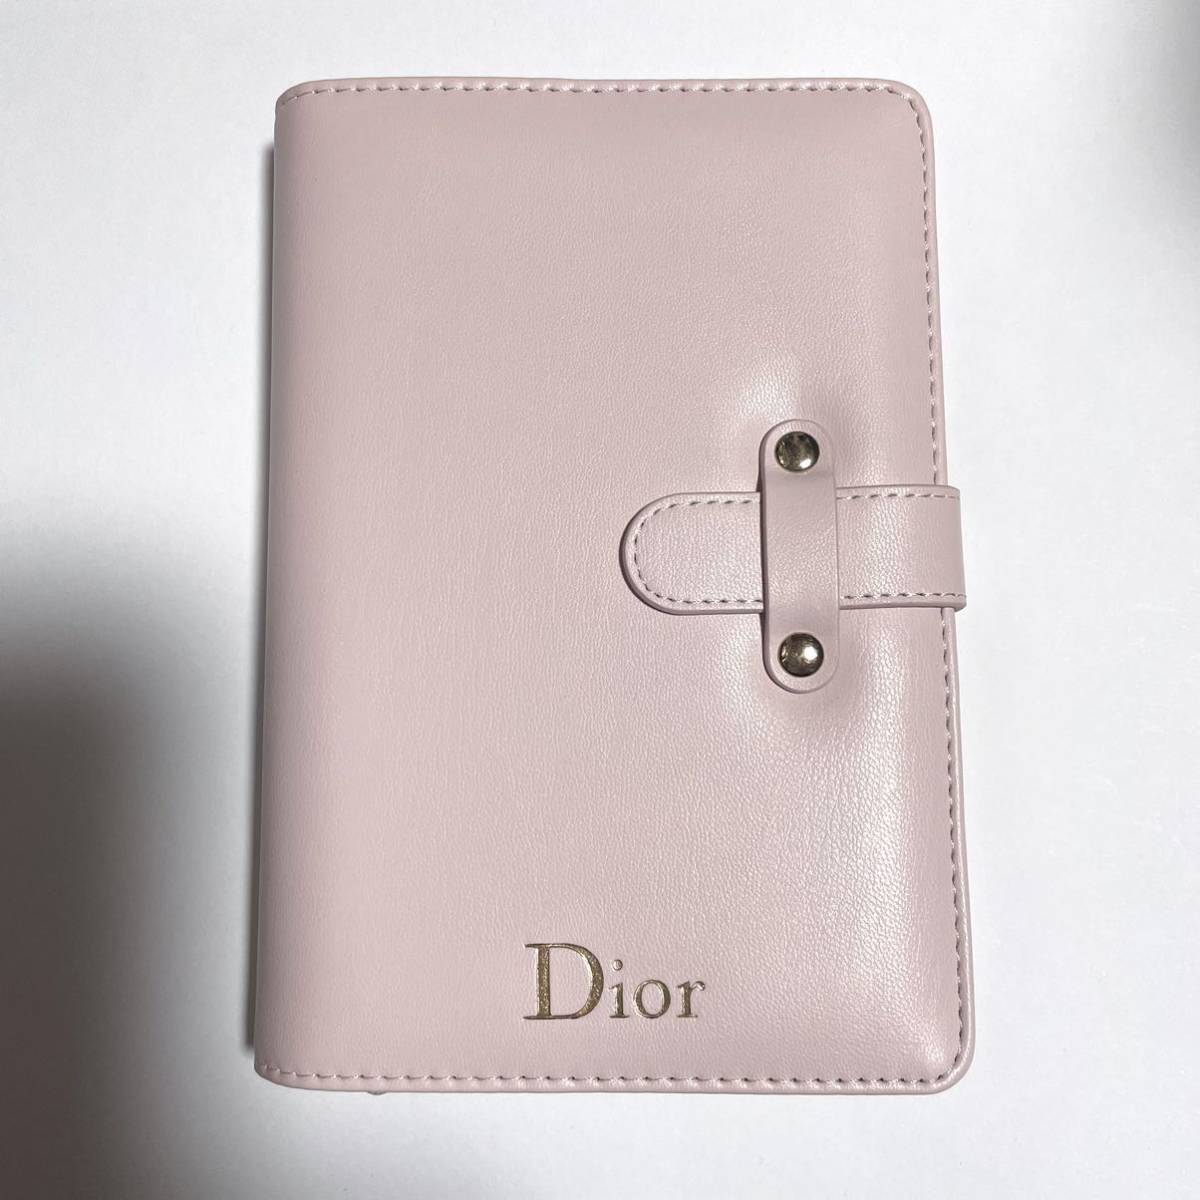 Christian Dior Christian Dior notebook Note Novelty not for sale pink.